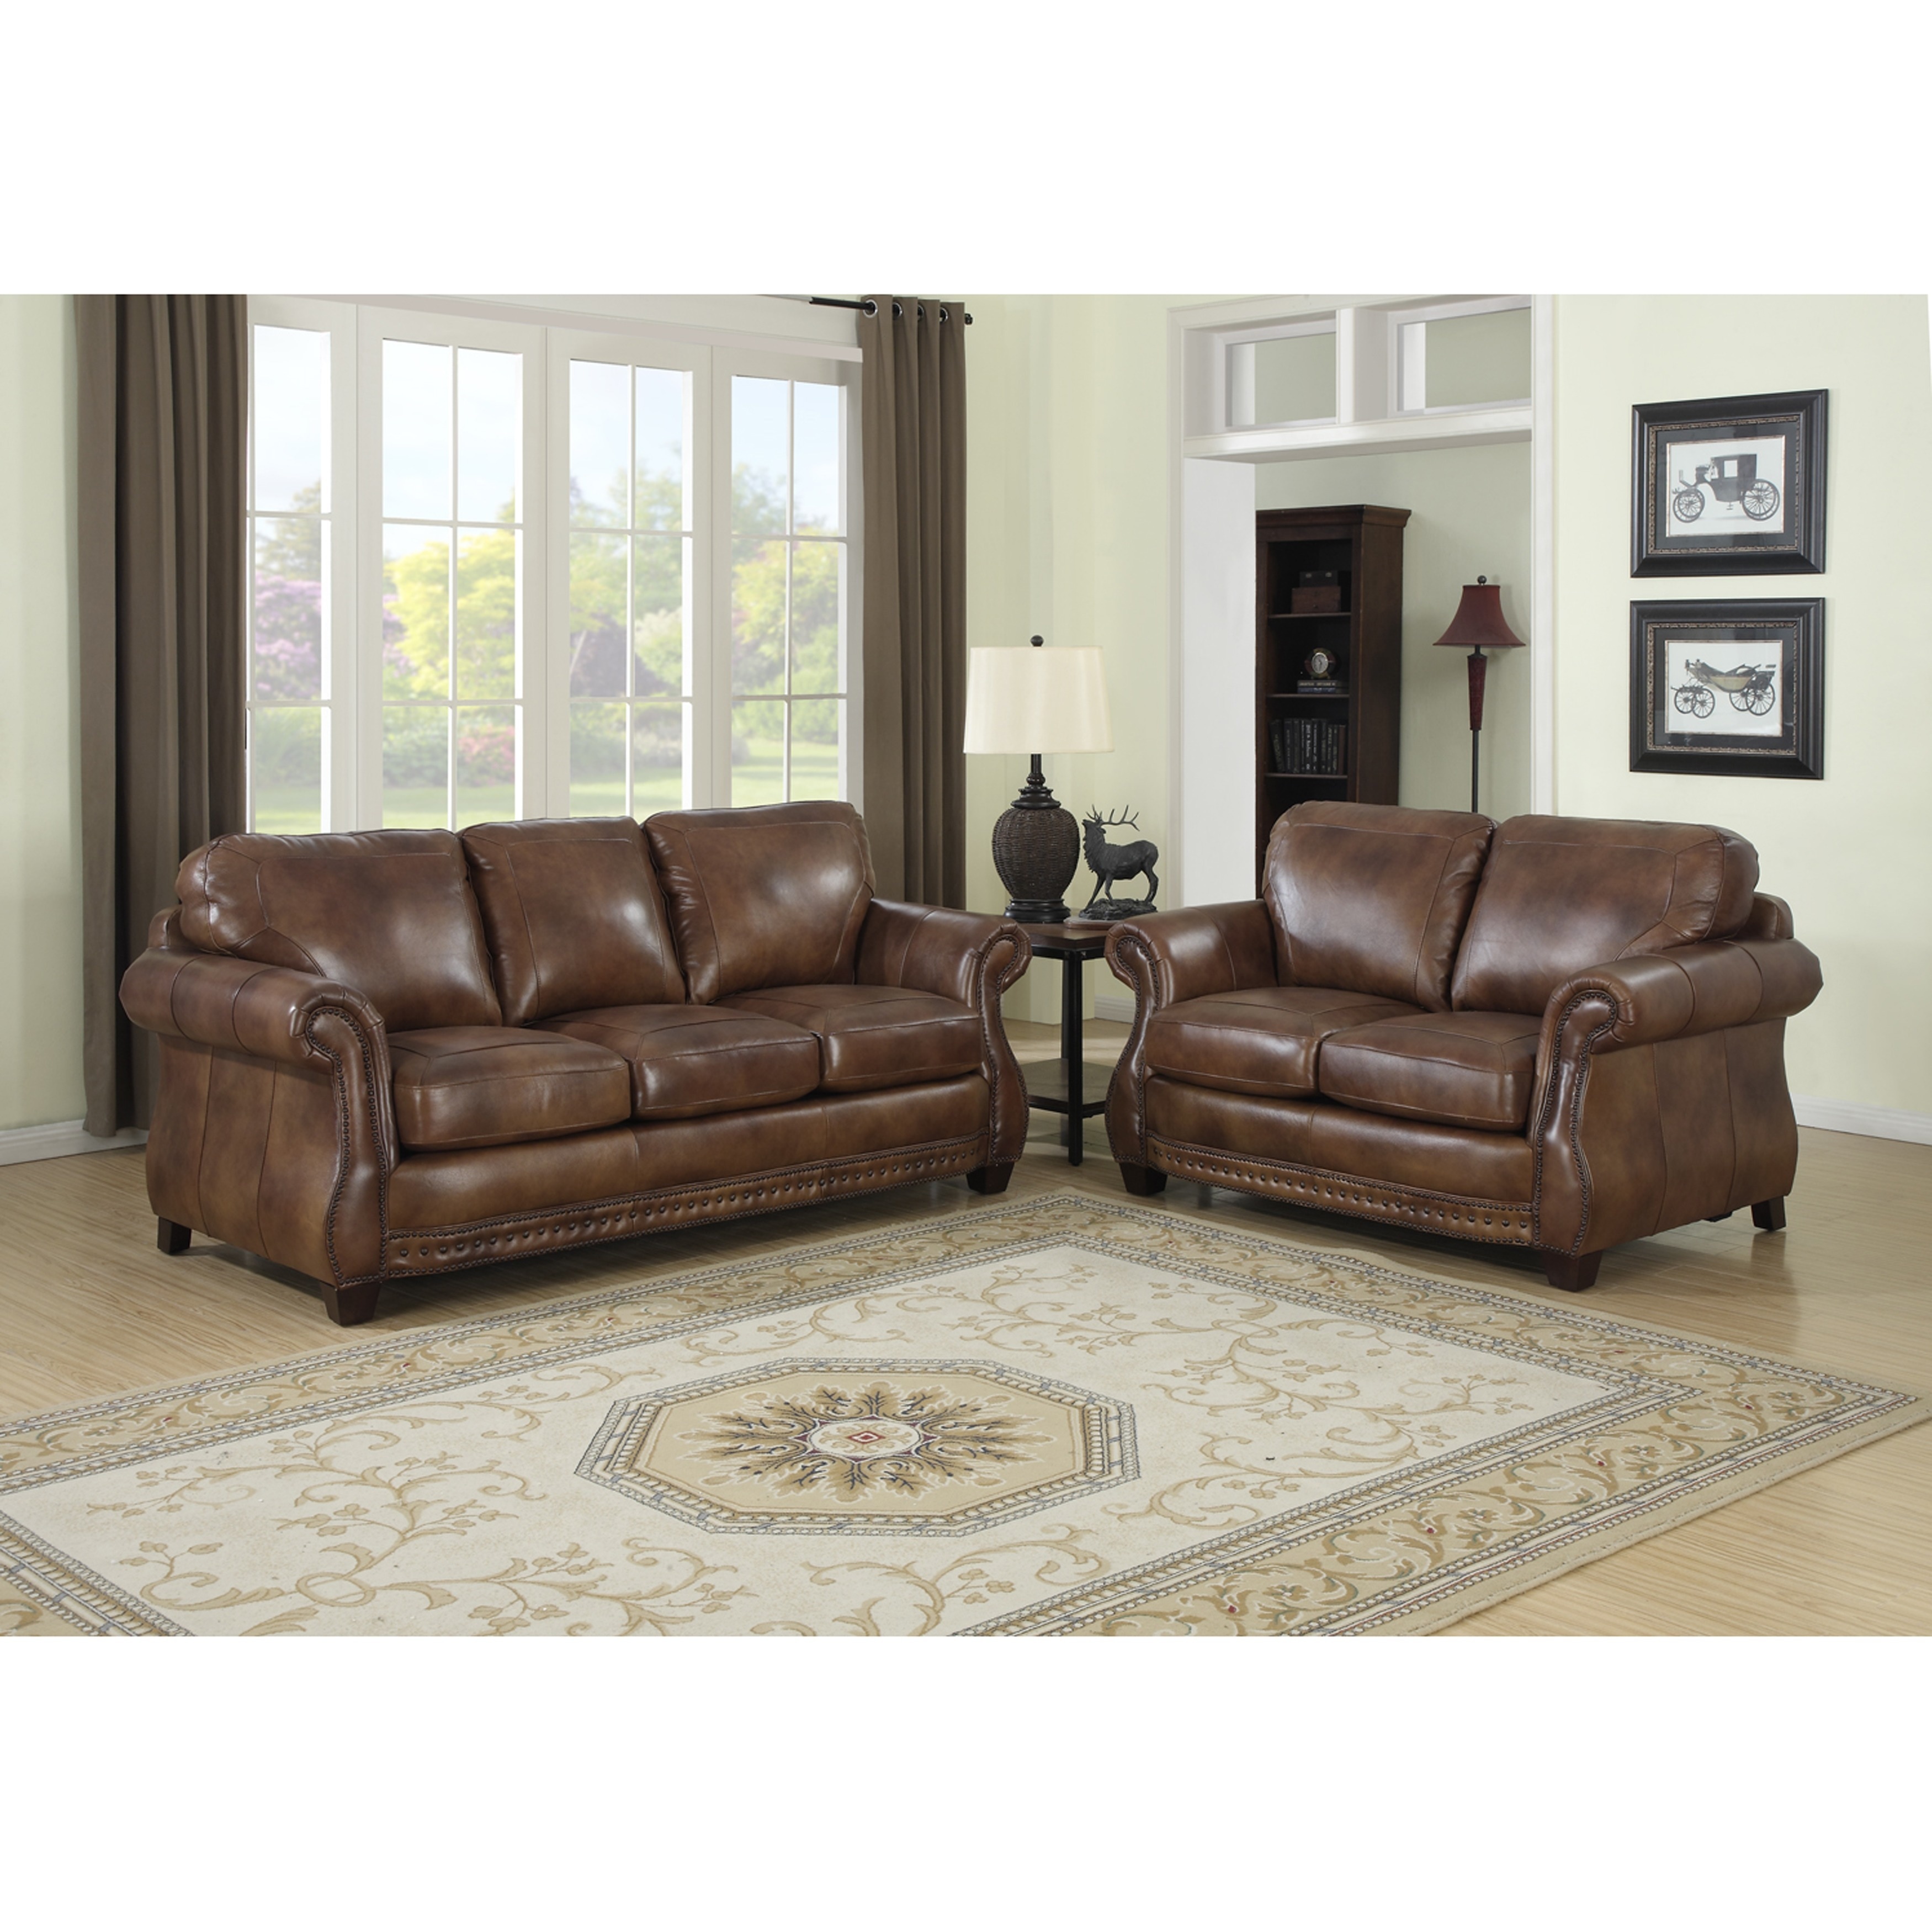 Sterling Cognac Brown Italian Leather Sofa and Loveseat - On Sale 